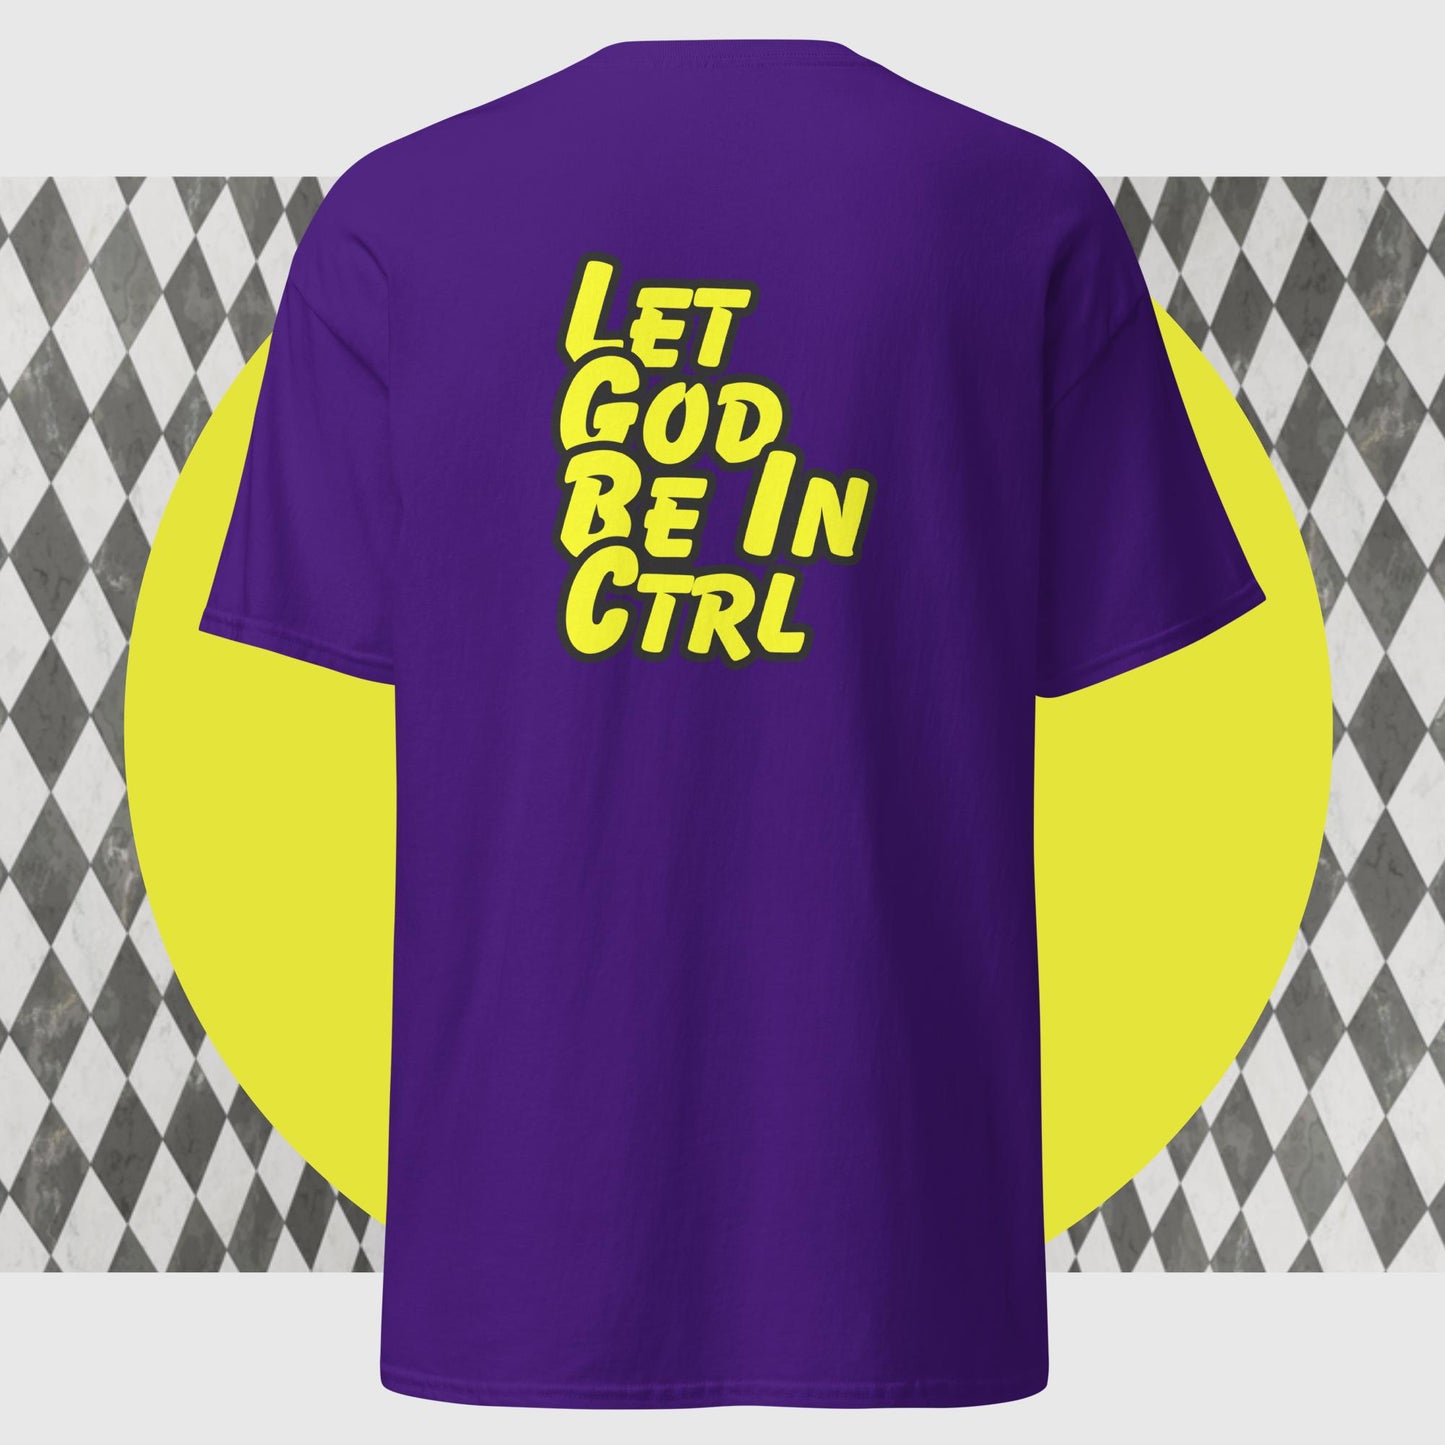 Let God Be In Ctrl classic tee